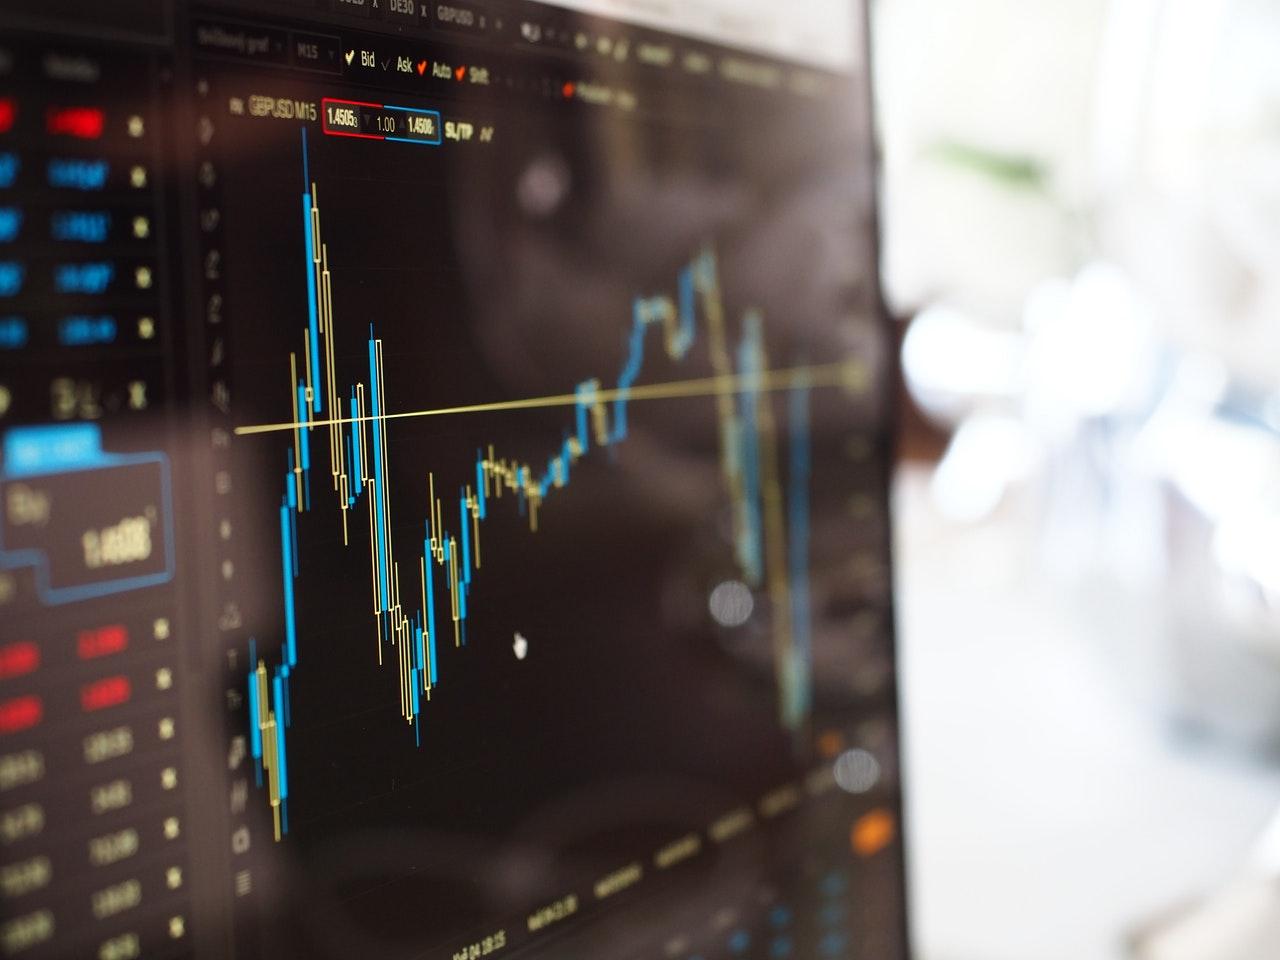 Stock markets in many countries have nose-dived on reports of an increase in Covid-19 woes. Photo: Pexels